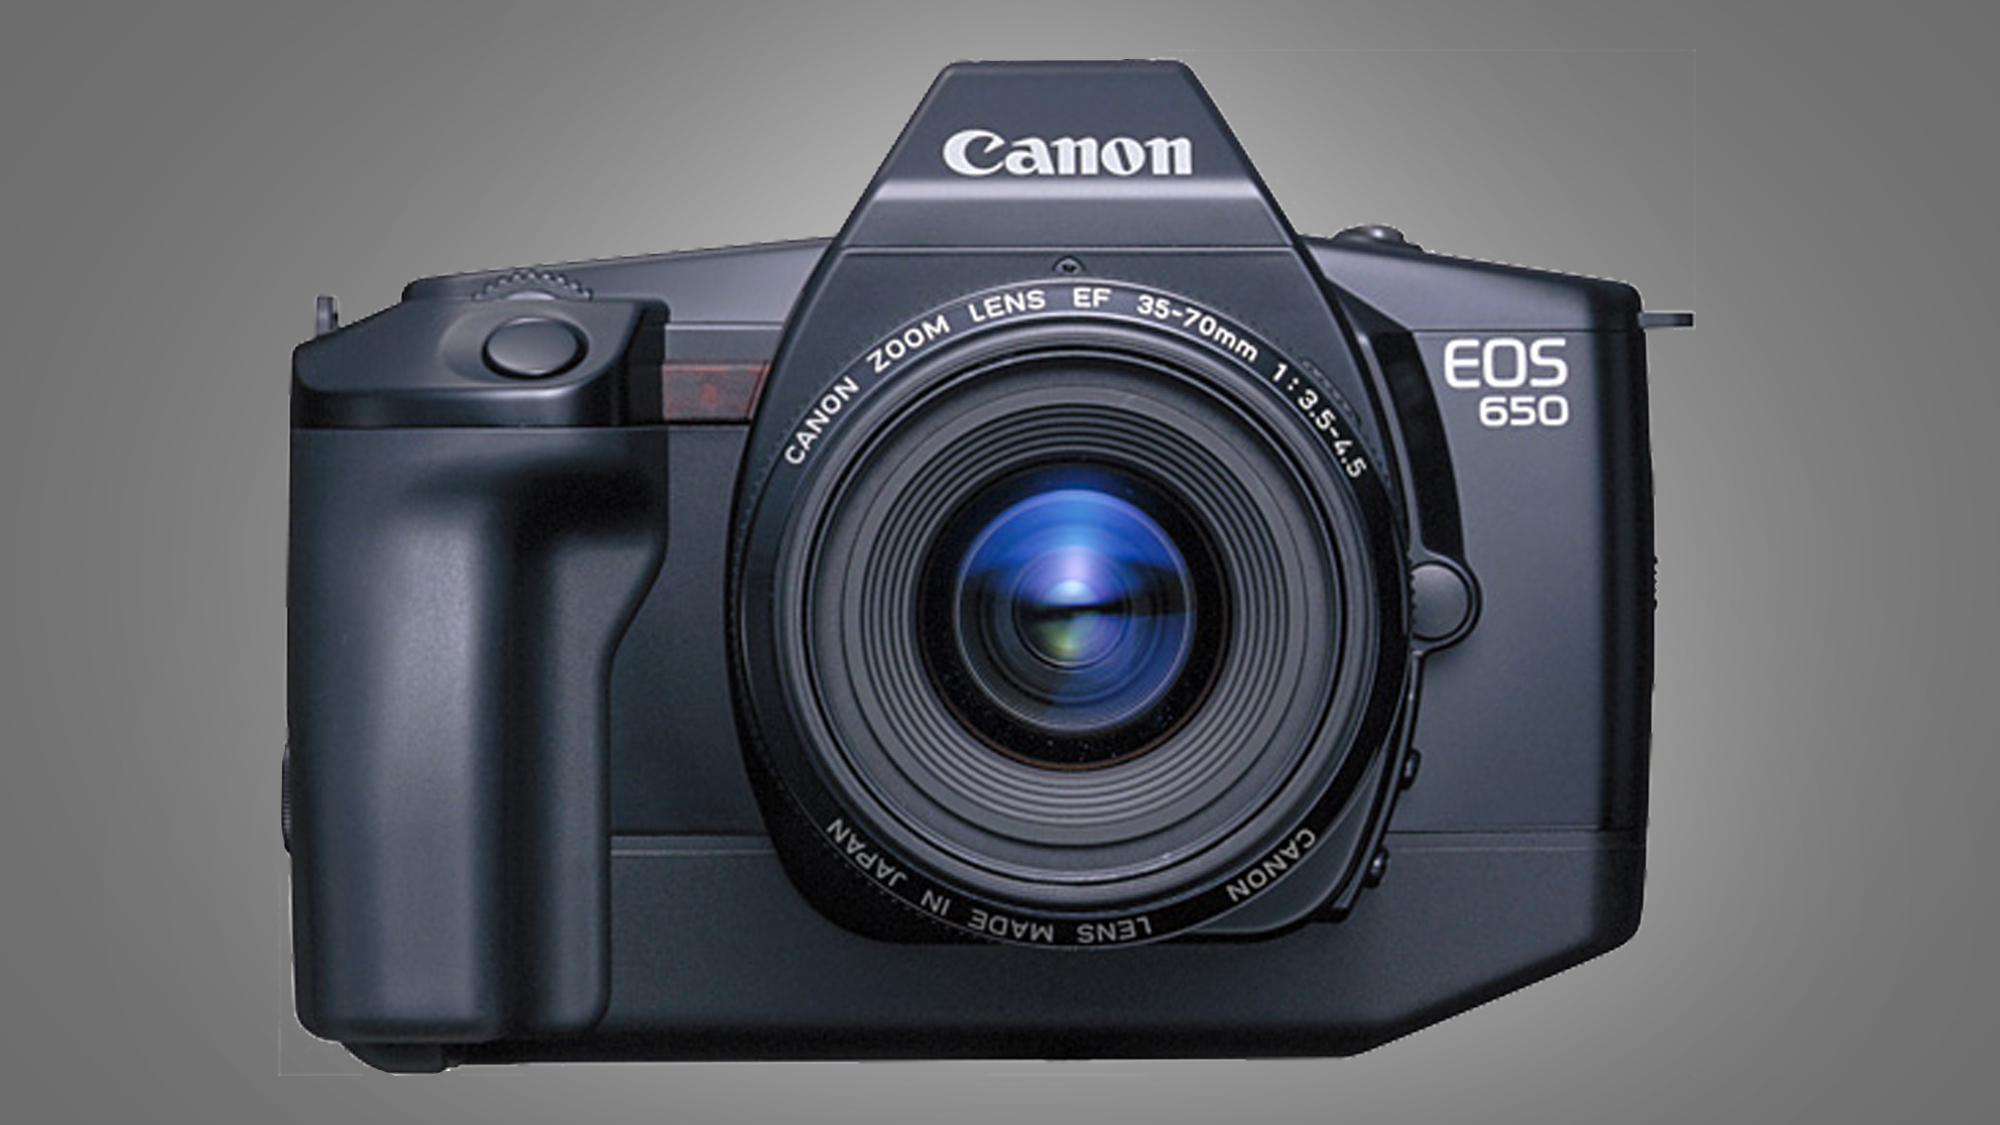 The Canon EOS 650 camera on a grey background